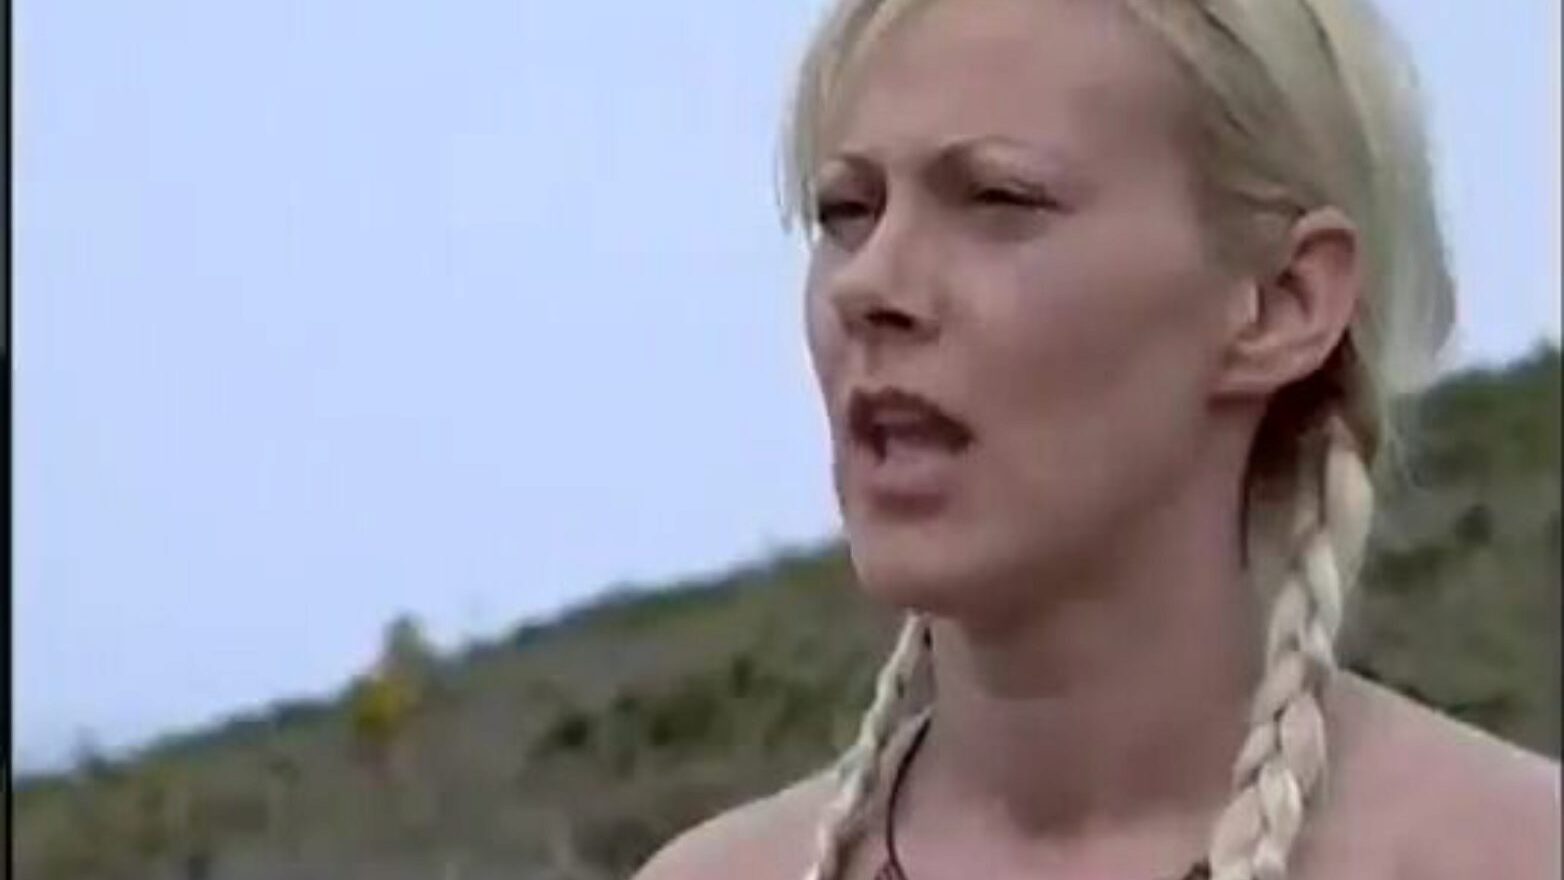 Silvia Saint is found off in the woods by a k